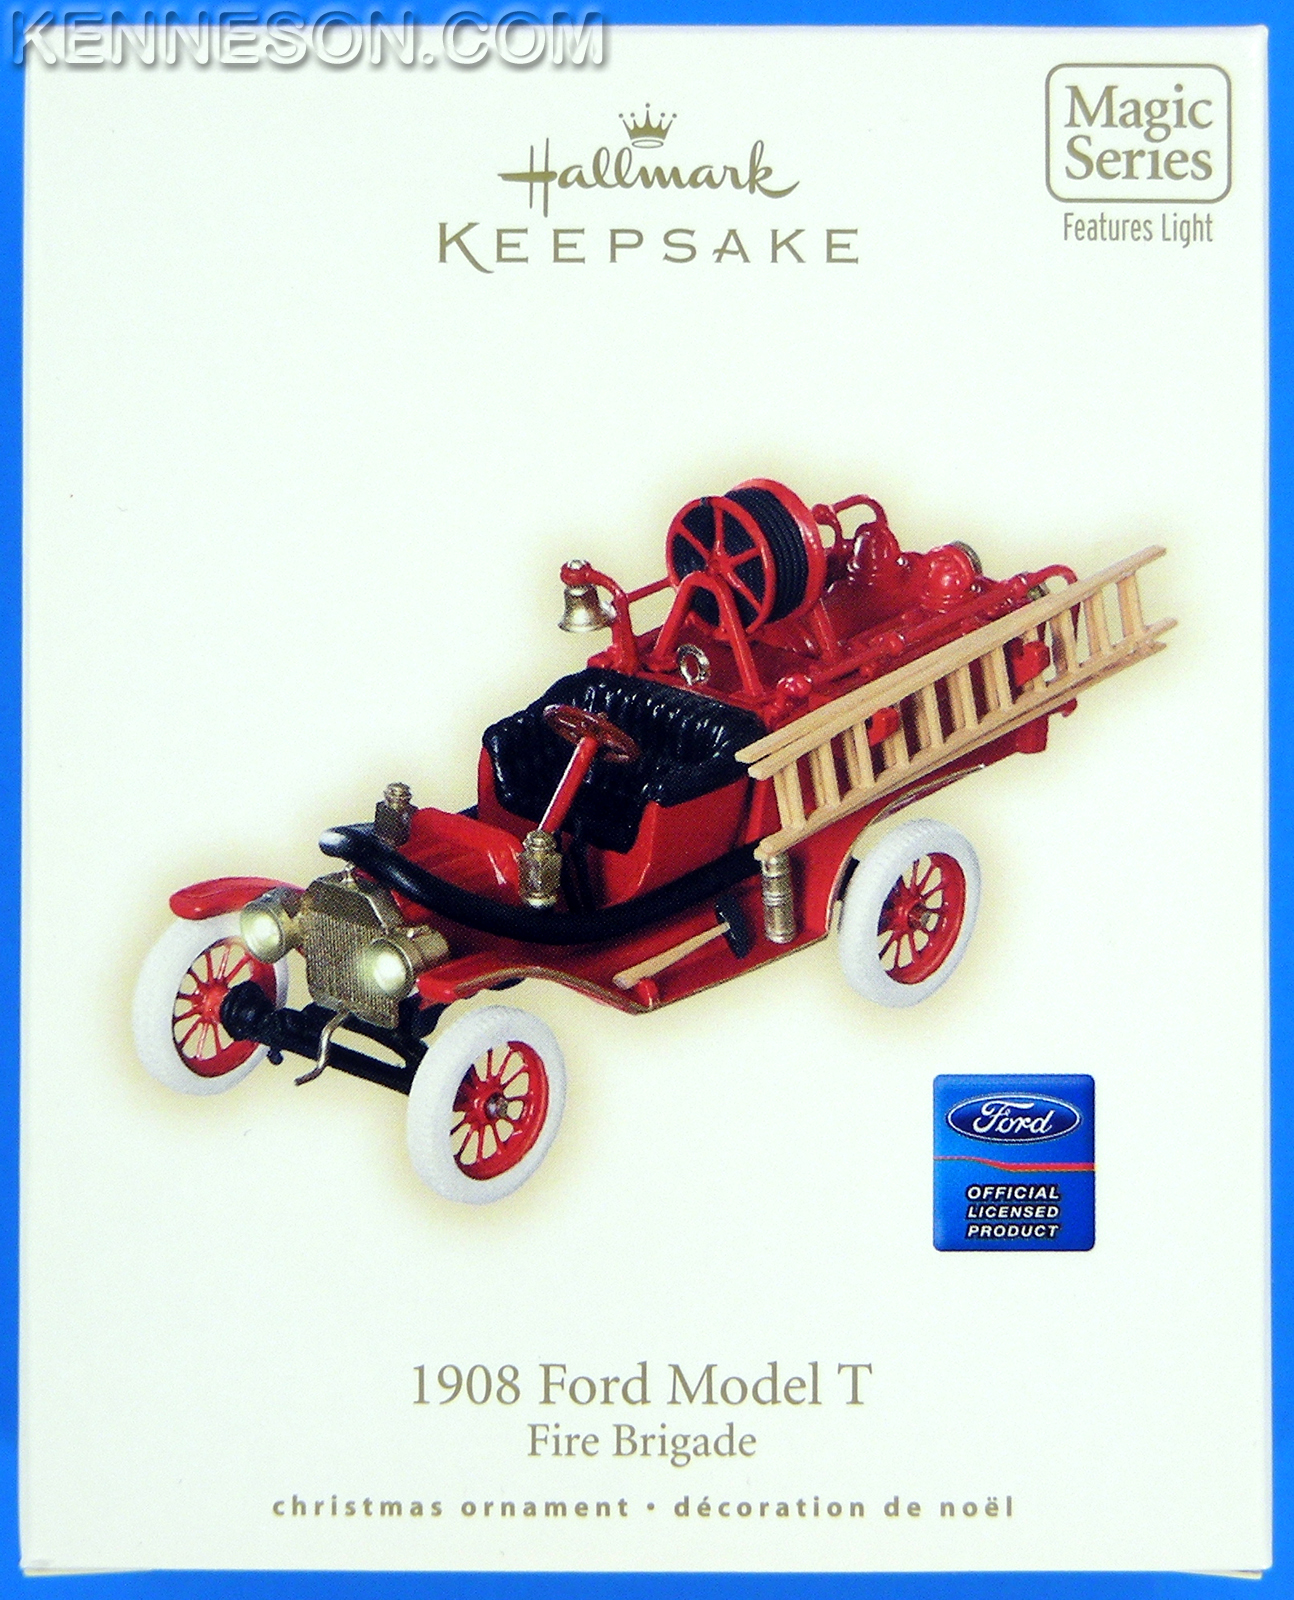 Model t ford christmas ornament #3